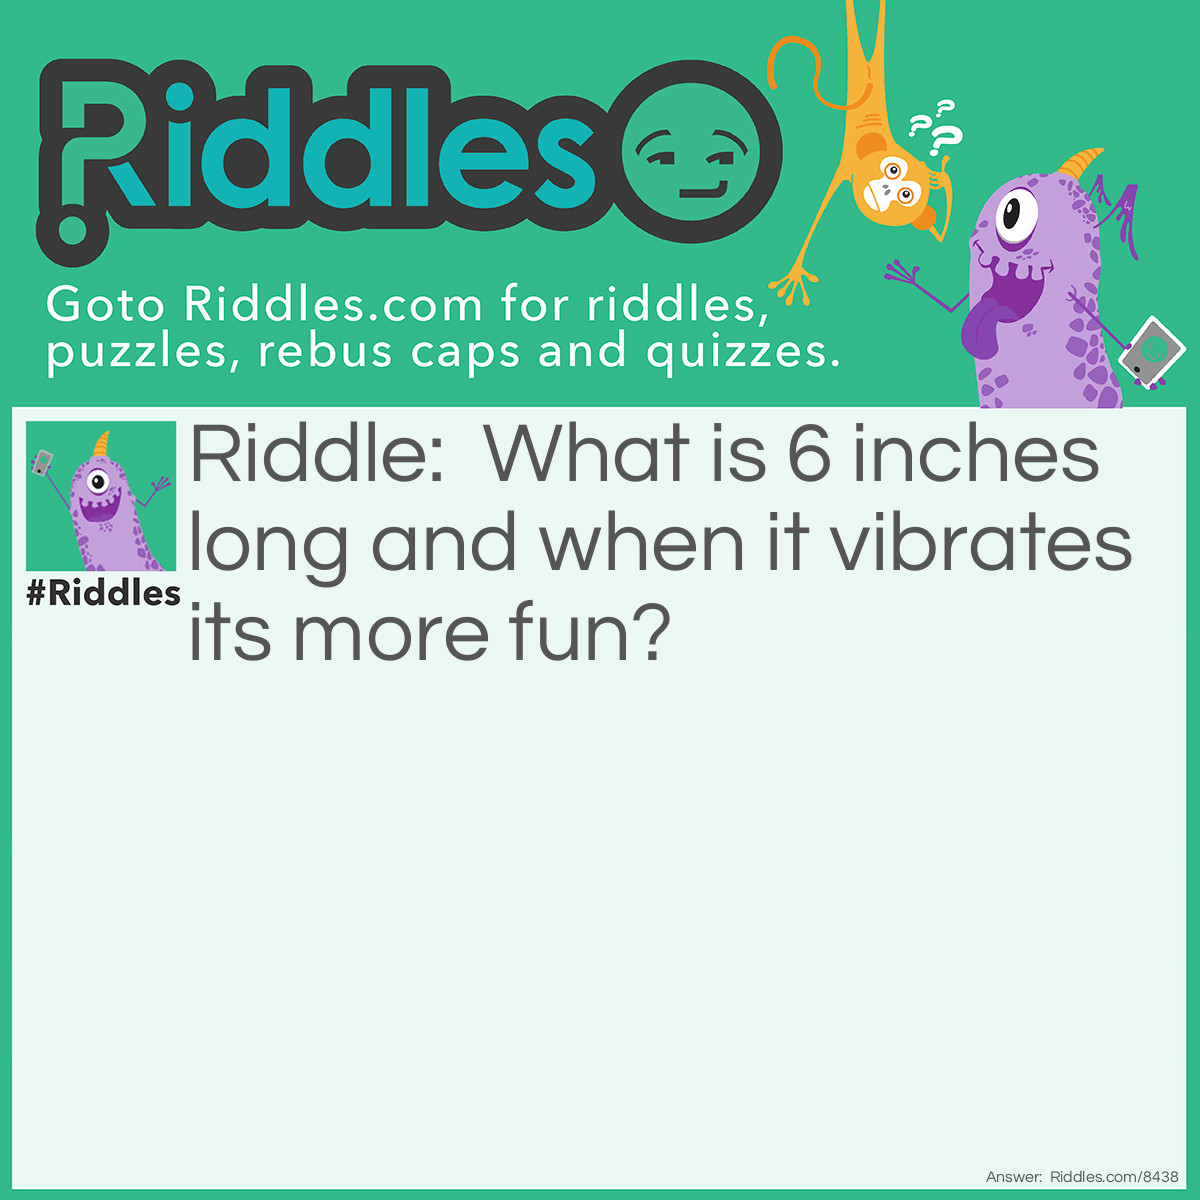 Riddle: What is 6 inches long and when it vibrates its more fun? Answer: A toothbrush.